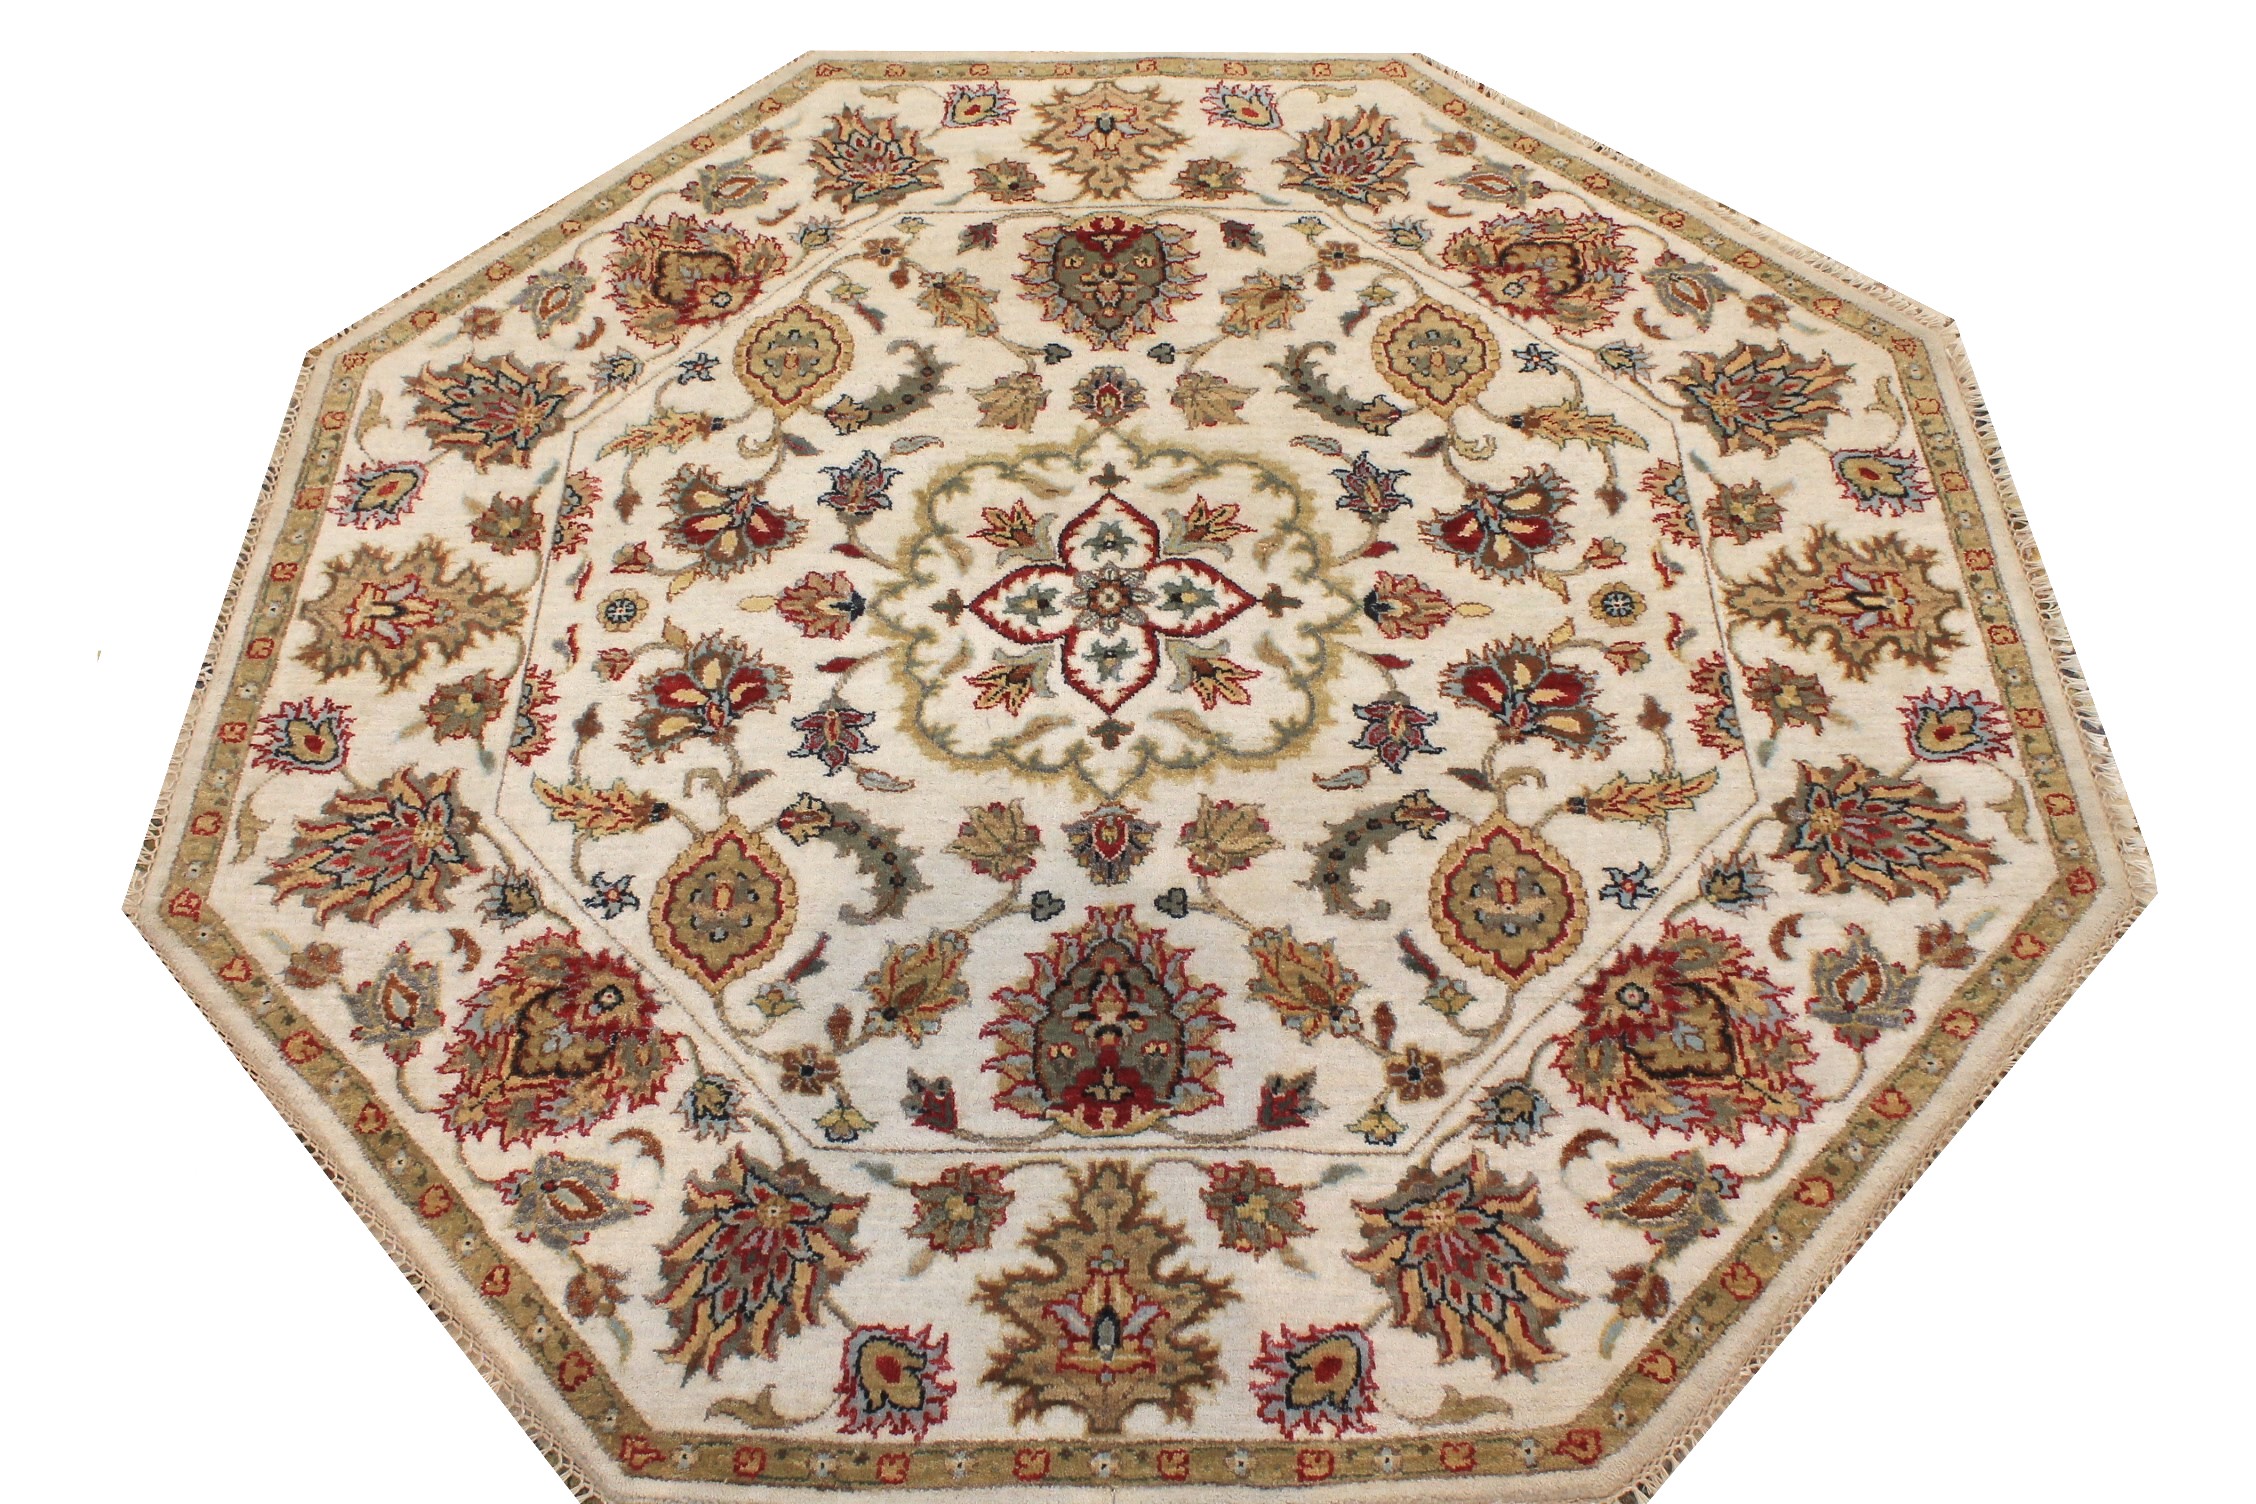 5 ft. Round & Square Traditional Hand Knotted Wool Area Rug - MR026896